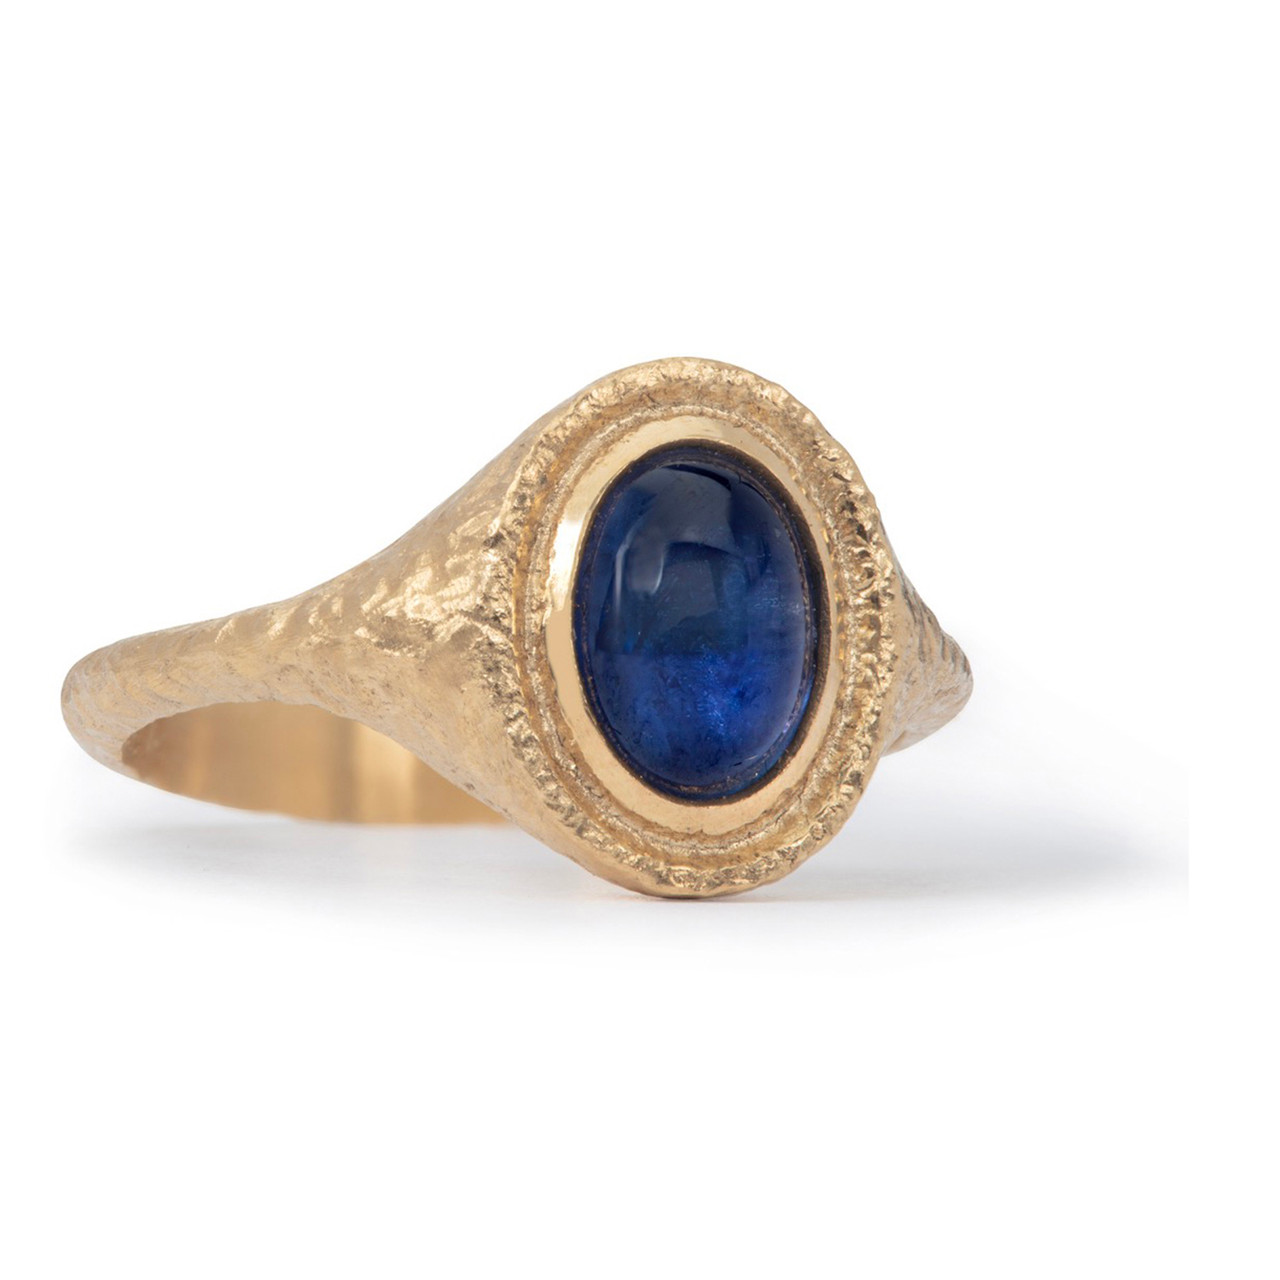 There's Plenty Sapphire Signet Ring, Maya Selway, tomfoolery